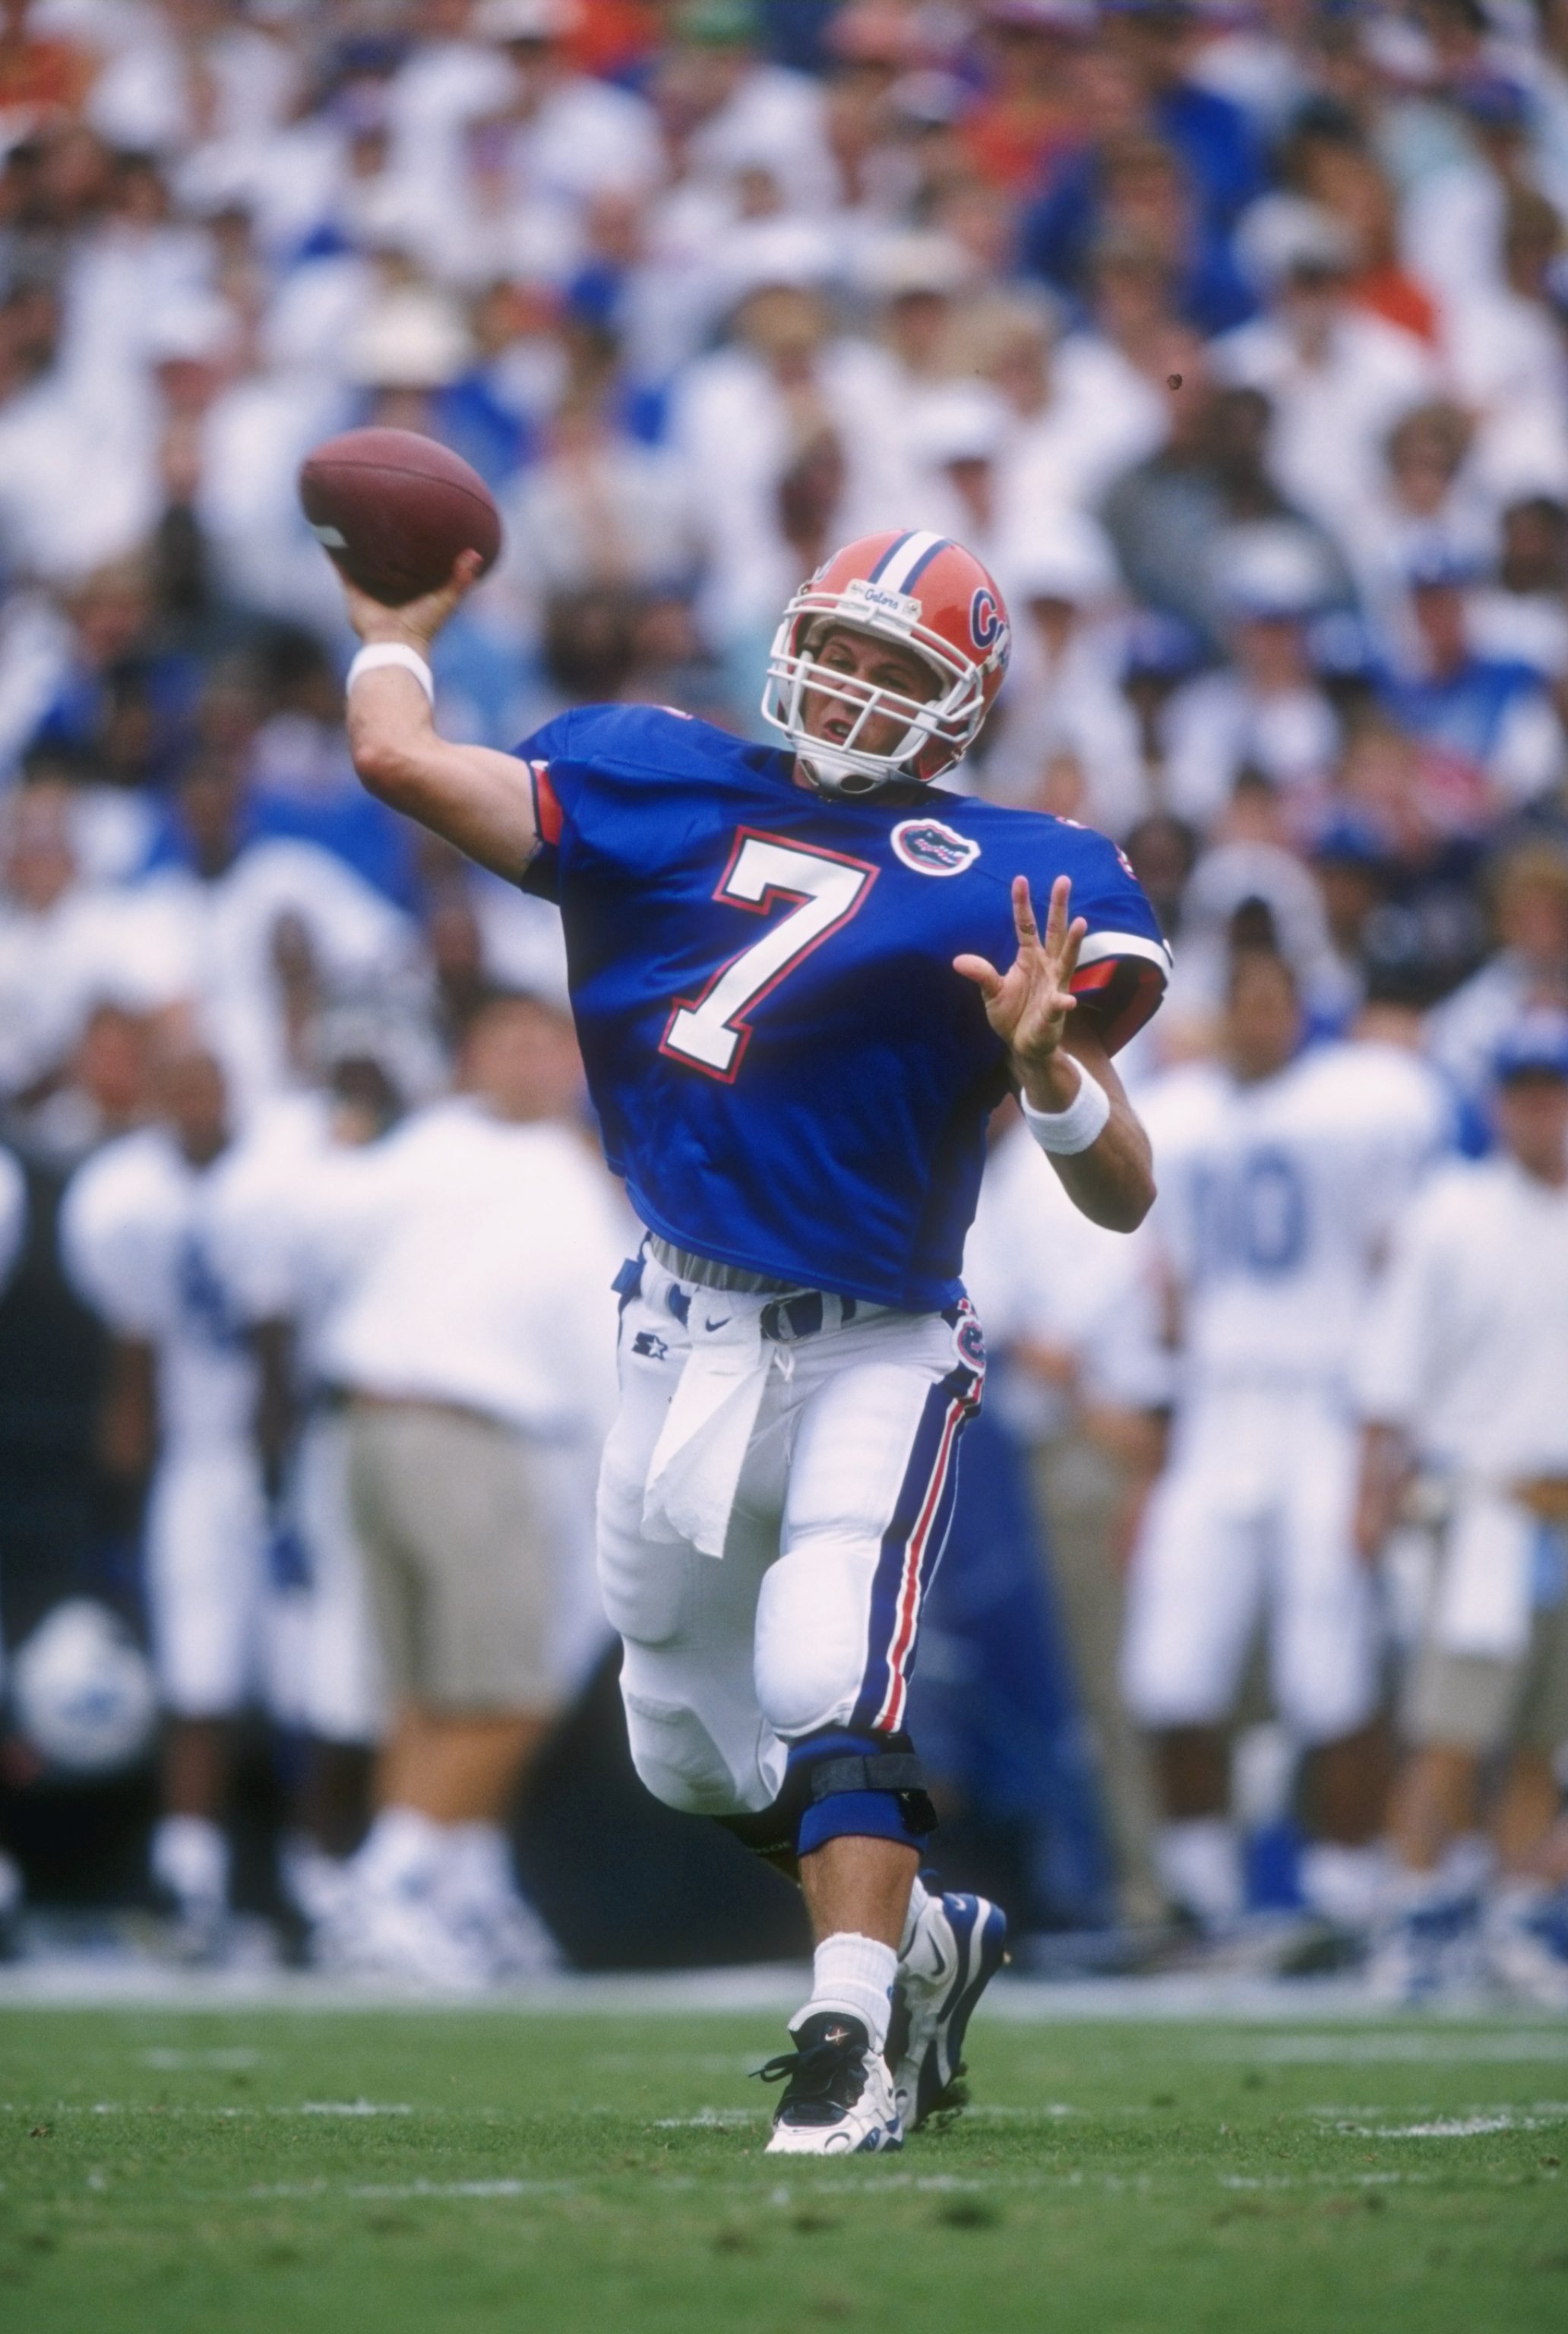 28 Sep 1996: Quarterback Danny Weurffel #7 of the Florida Gators looks down field at an open receiver as he sets his feet to throw a pass during a play in the Gators 65-0 victory over the Kentucky Wildcats at Florida Field in Gainesville, Florida. Mandato